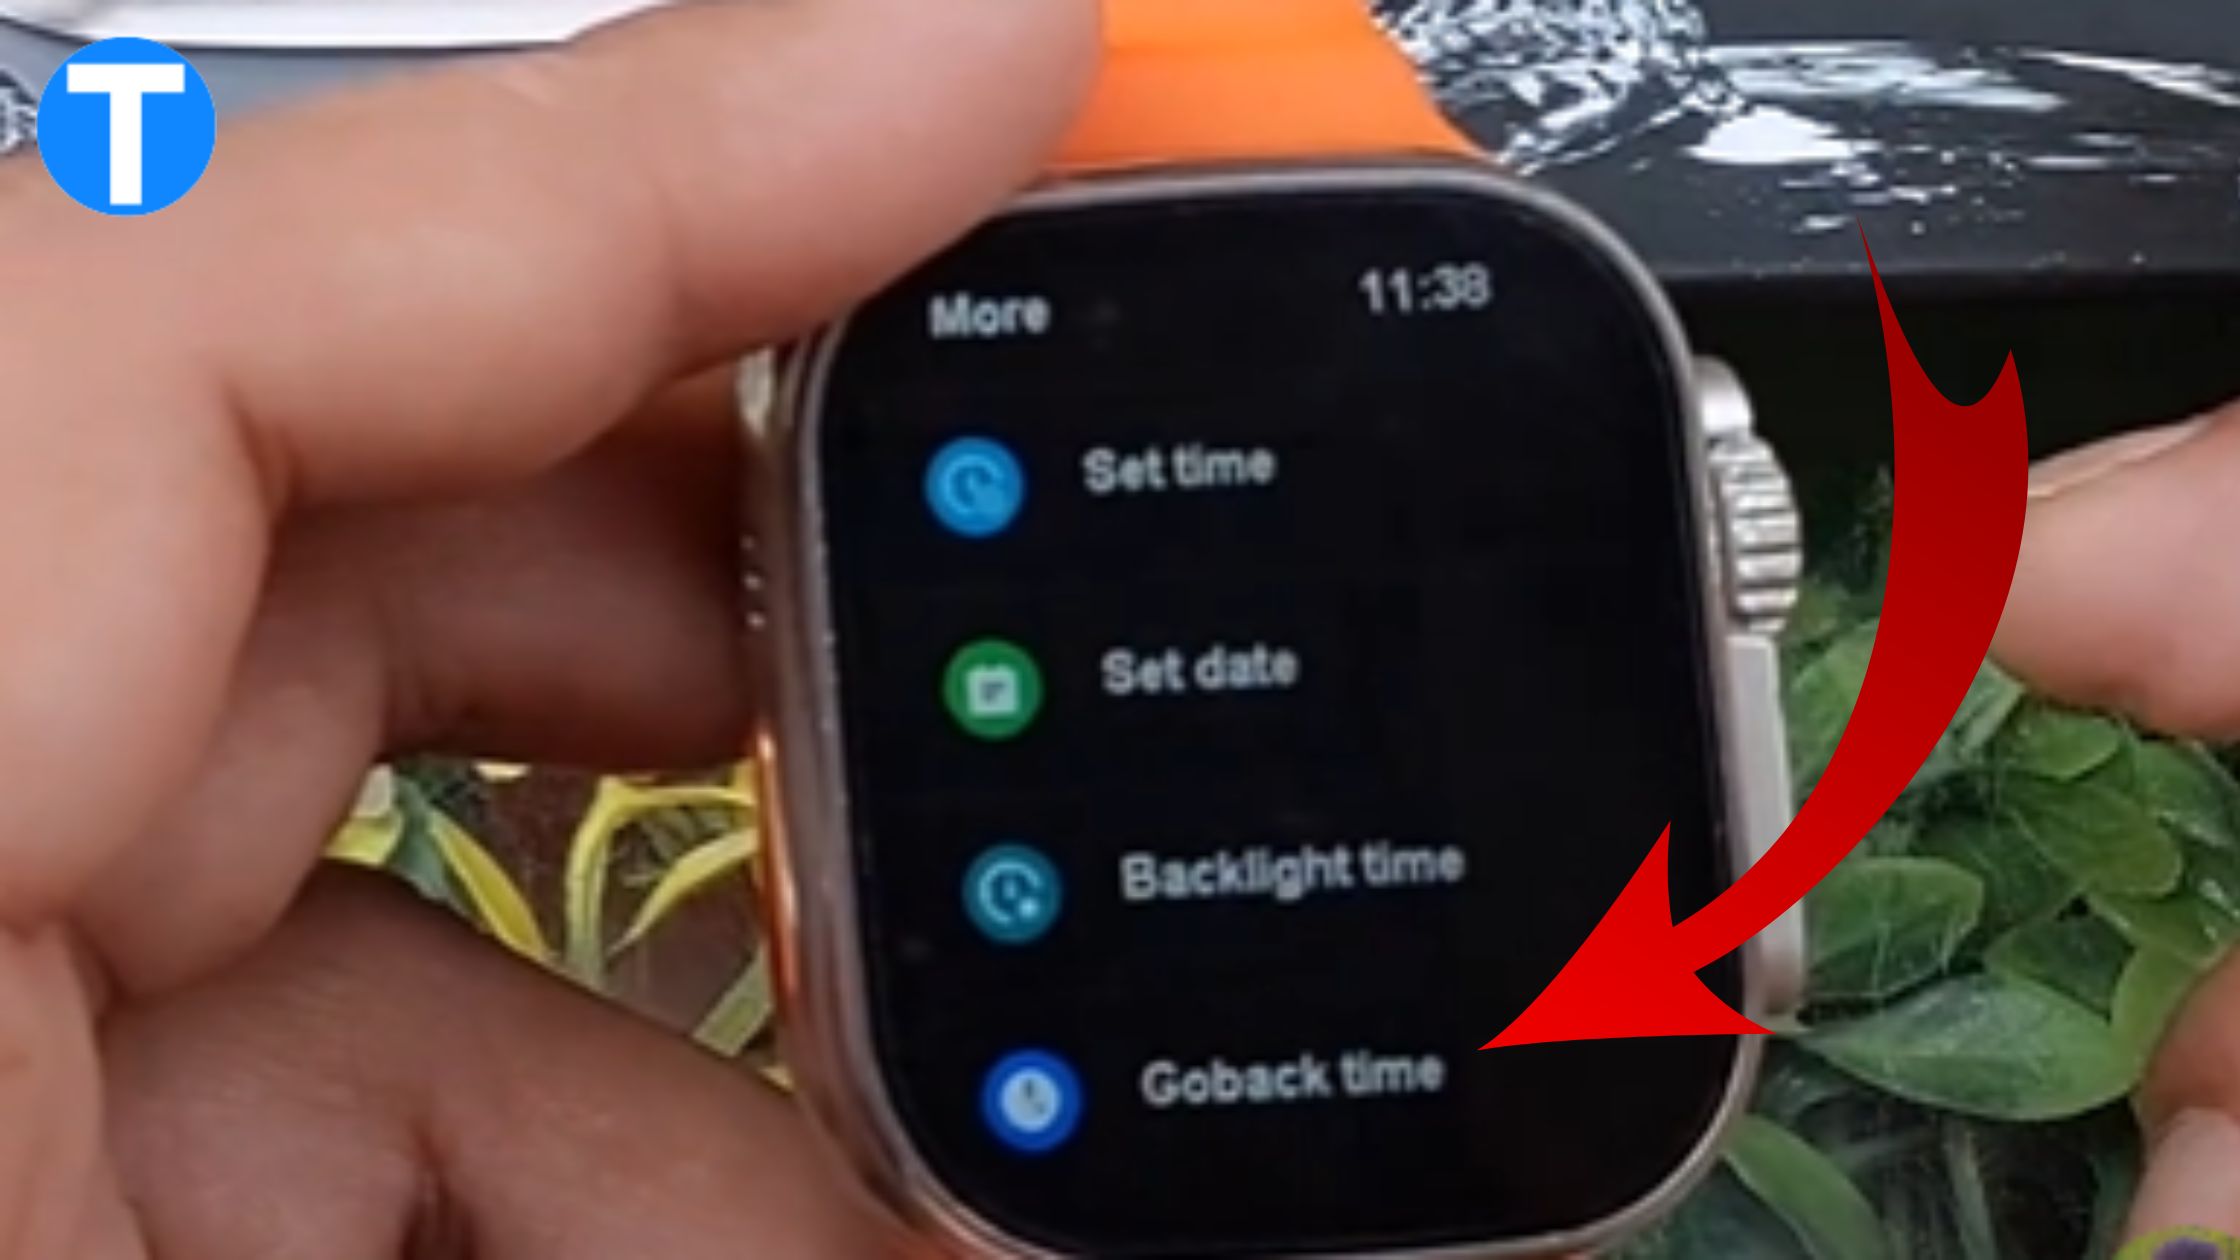 what is Go Back time in a smartwatch